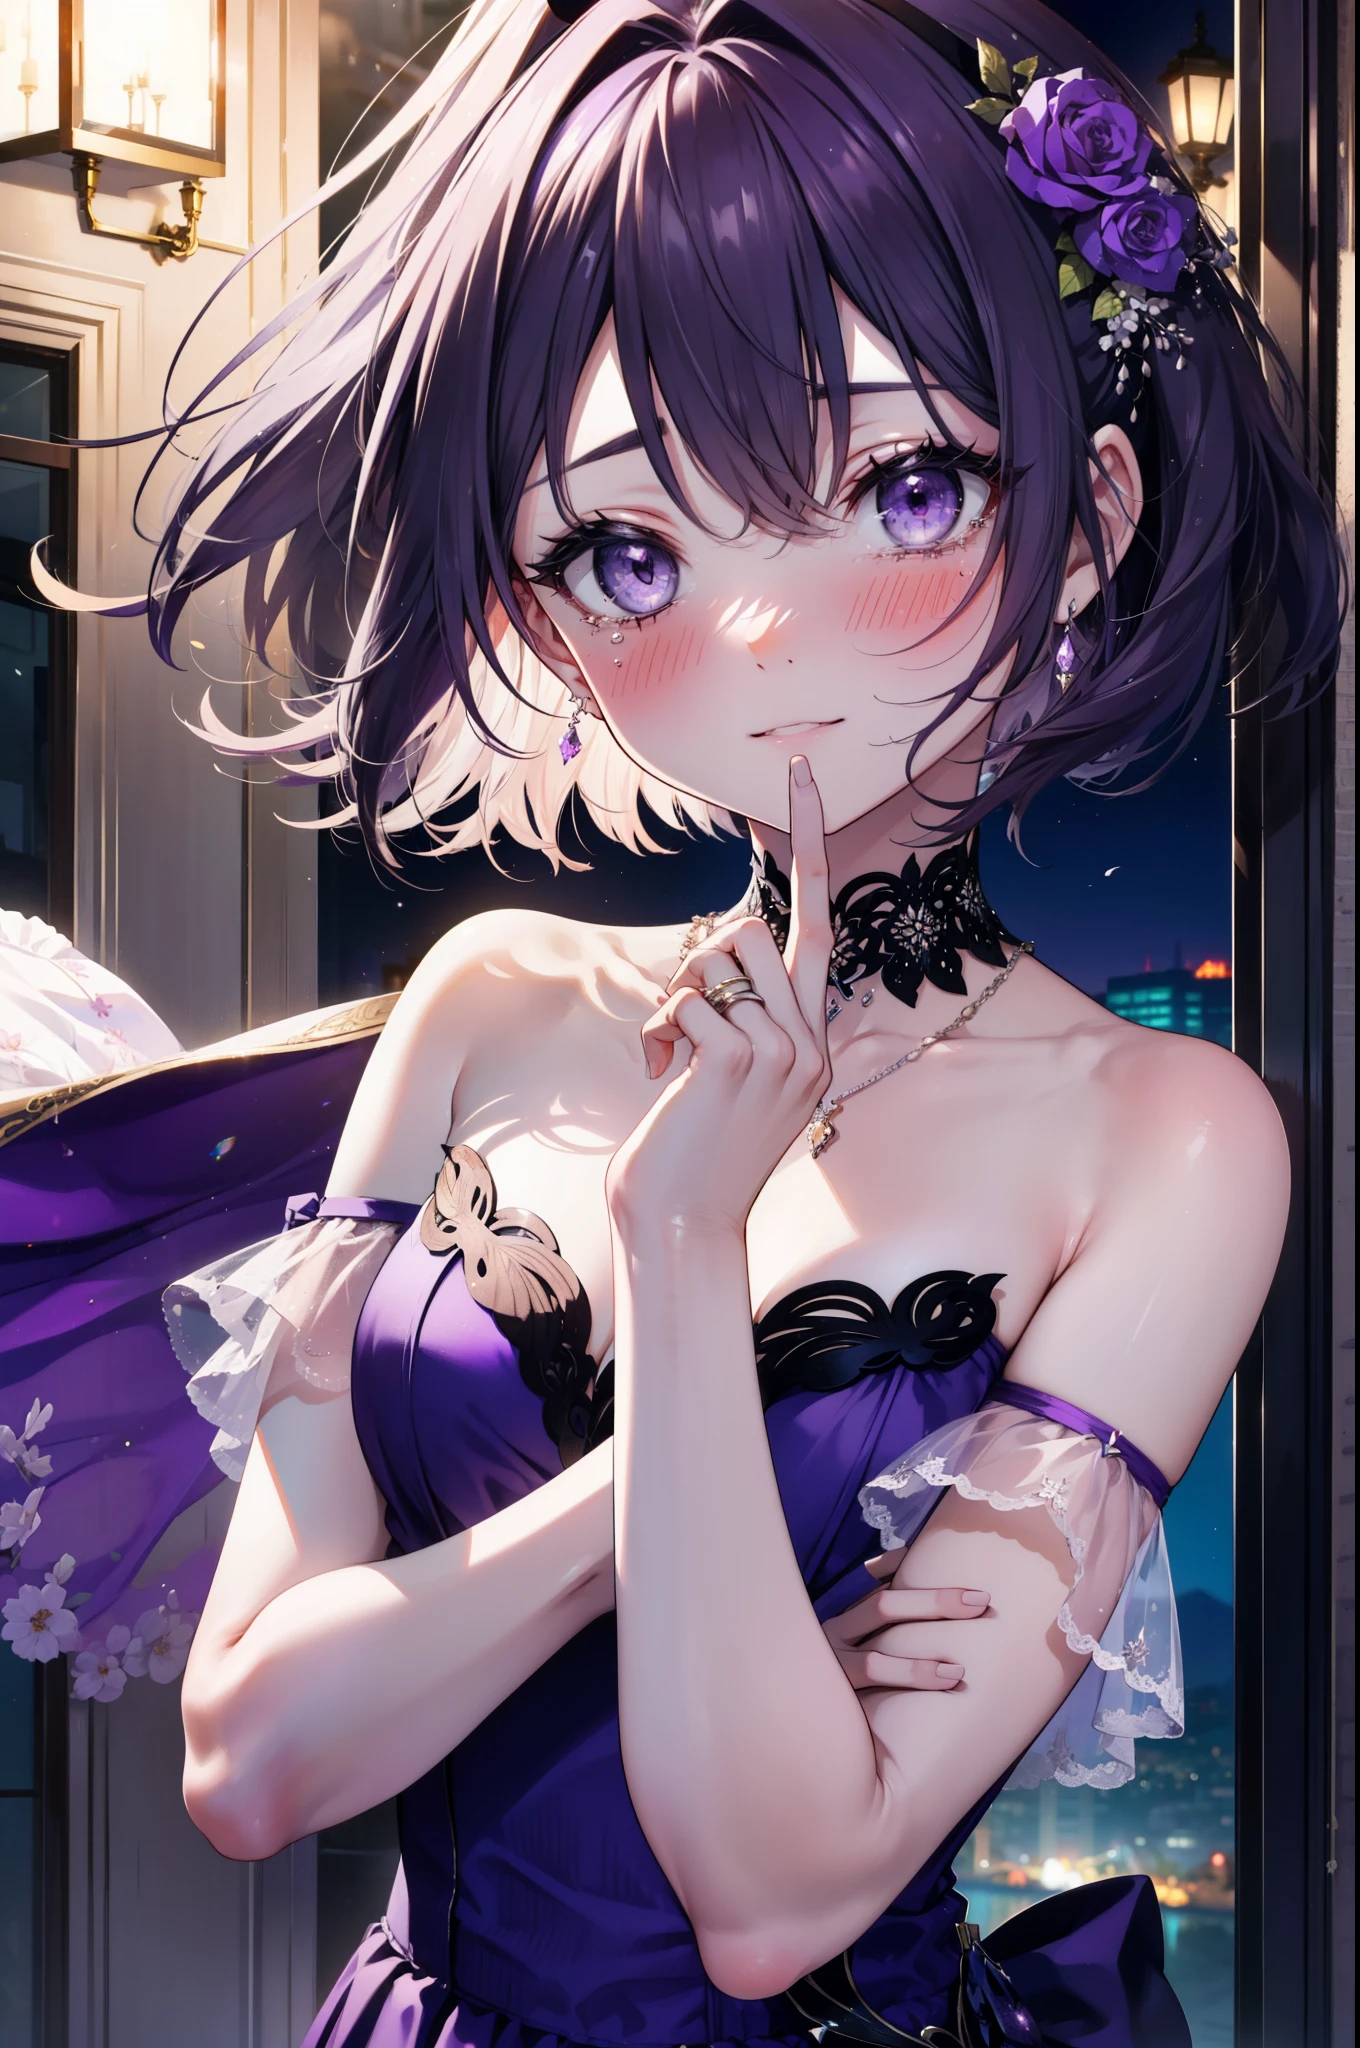 yuukikonno, Yuki Konno,Black Hair,short hair,Bob Hair ,Green headband,(Purple eyes:1.5), (Small breasts:1.2), smile,Purple Dress,Purple long skirt,purple stiletto heels,No sleeve,Expose your shoulders,Bare arms,Bare neck,bare clavicle,Wearing a wedding ring on the left hand,Heart Necklace,Tears stream down her face,Tears of joy,I cry a lot,Romantic night view,moonlight,whole bodyがイラストに入るように、
break outdoors, hill,
break looking at viewer, whole body,
break (masterpiece:1.2), highest quality, High resolution, unity 8k wallpaper, (shape:0.8), (Beautiful details:1.6), Highly detailed face, Perfect lighting, Highly detailed CG, (Perfect hands, Perfect Anatomy),